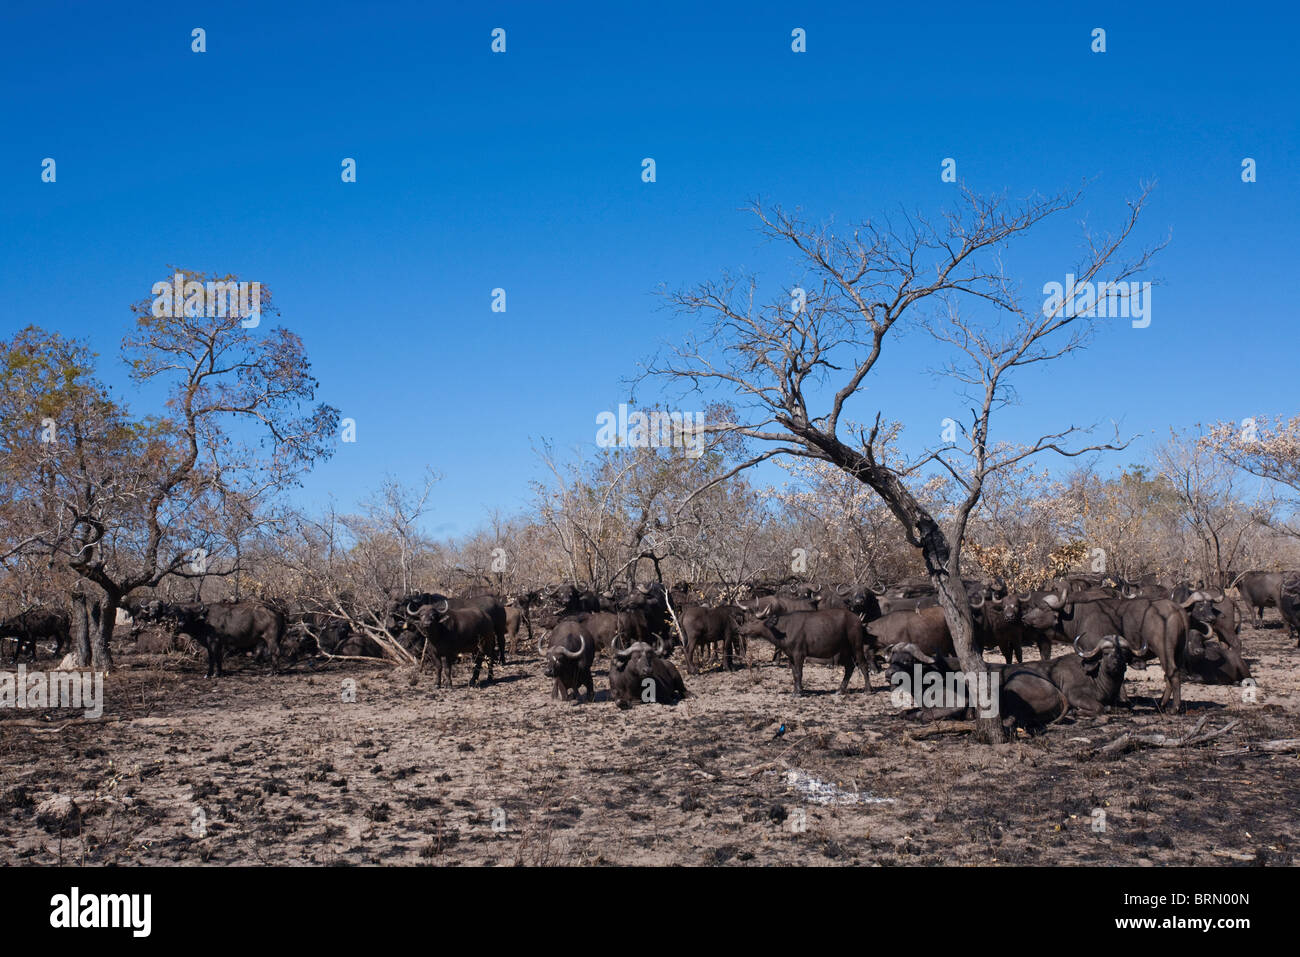 Wide angle view of a buffalo herd standing around in burnt veld during the dry season Stock Photo